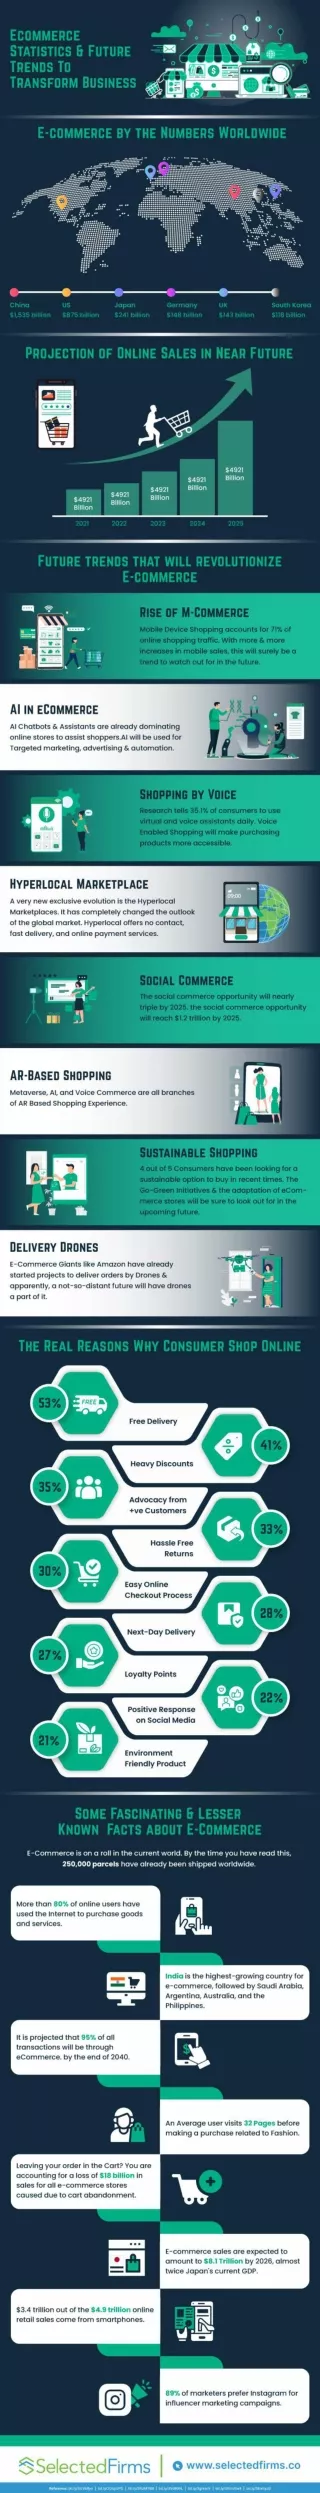 Ecommerce Statistics & Future Trends To Transform Business -  Infographic